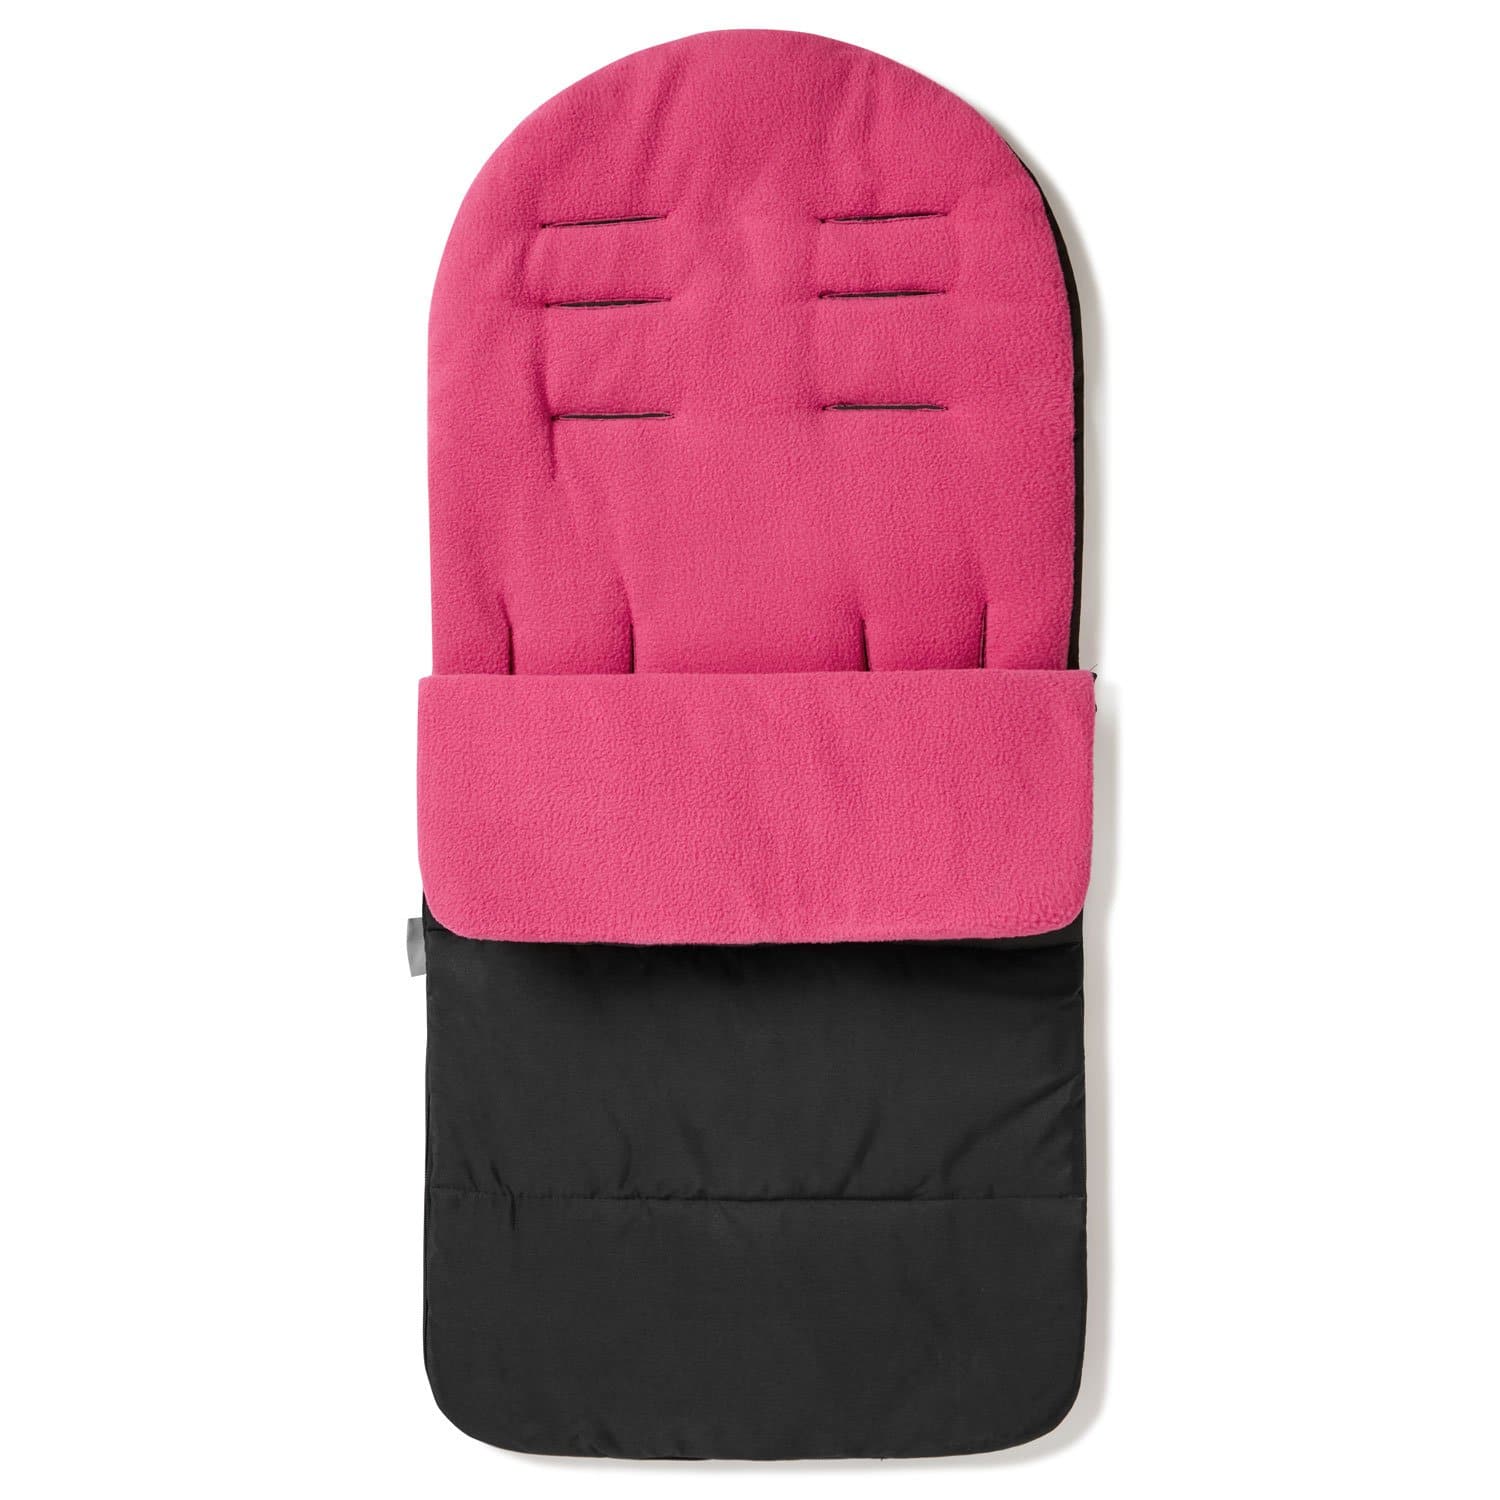 Premium Footmuff / Cosy Toes Compatible with Baby Elegance - Pink Rose / Fits All Models | For Your Little One